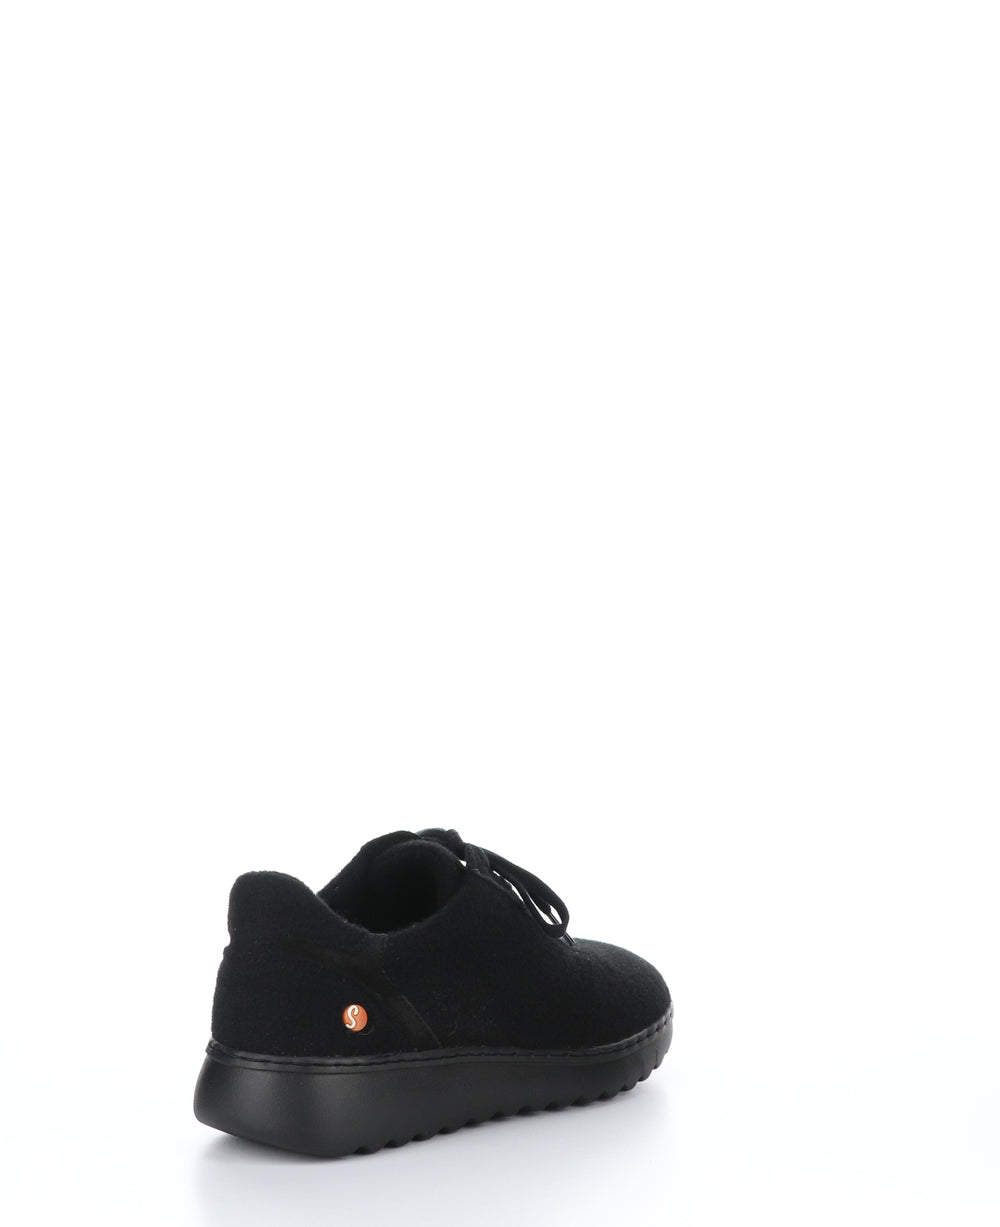 ELRA670SOF Black Round Toe Shoes|ELRA670SOF Chaussures à Bout Rond in Noir